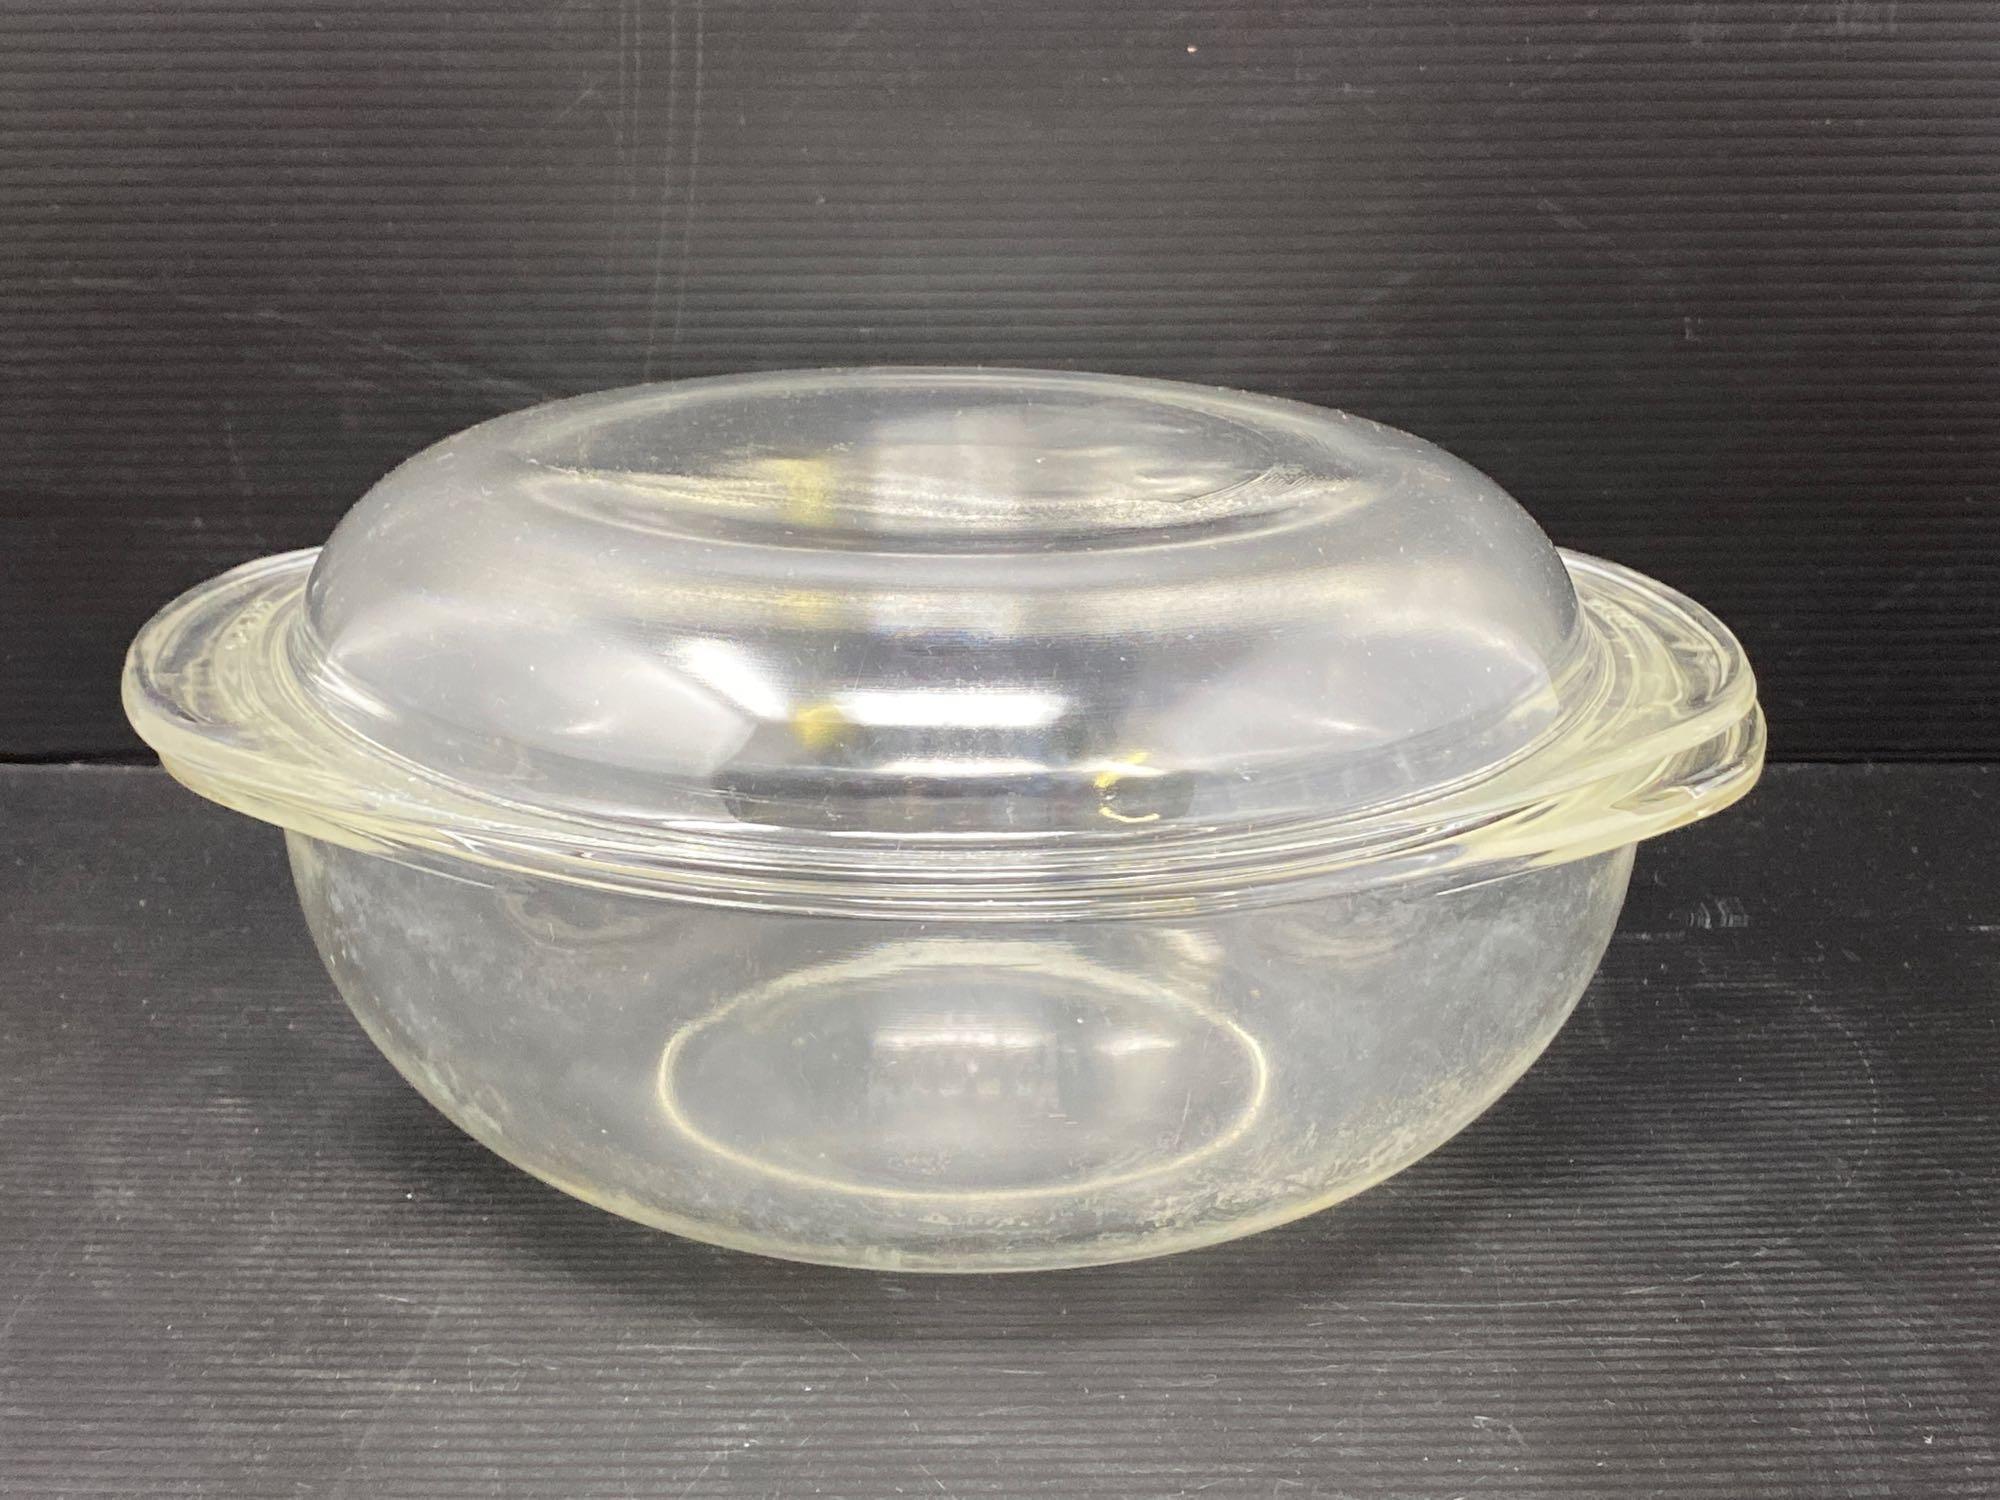 Gold Corning and Clear Lidded Pyrex Casserole Dishes